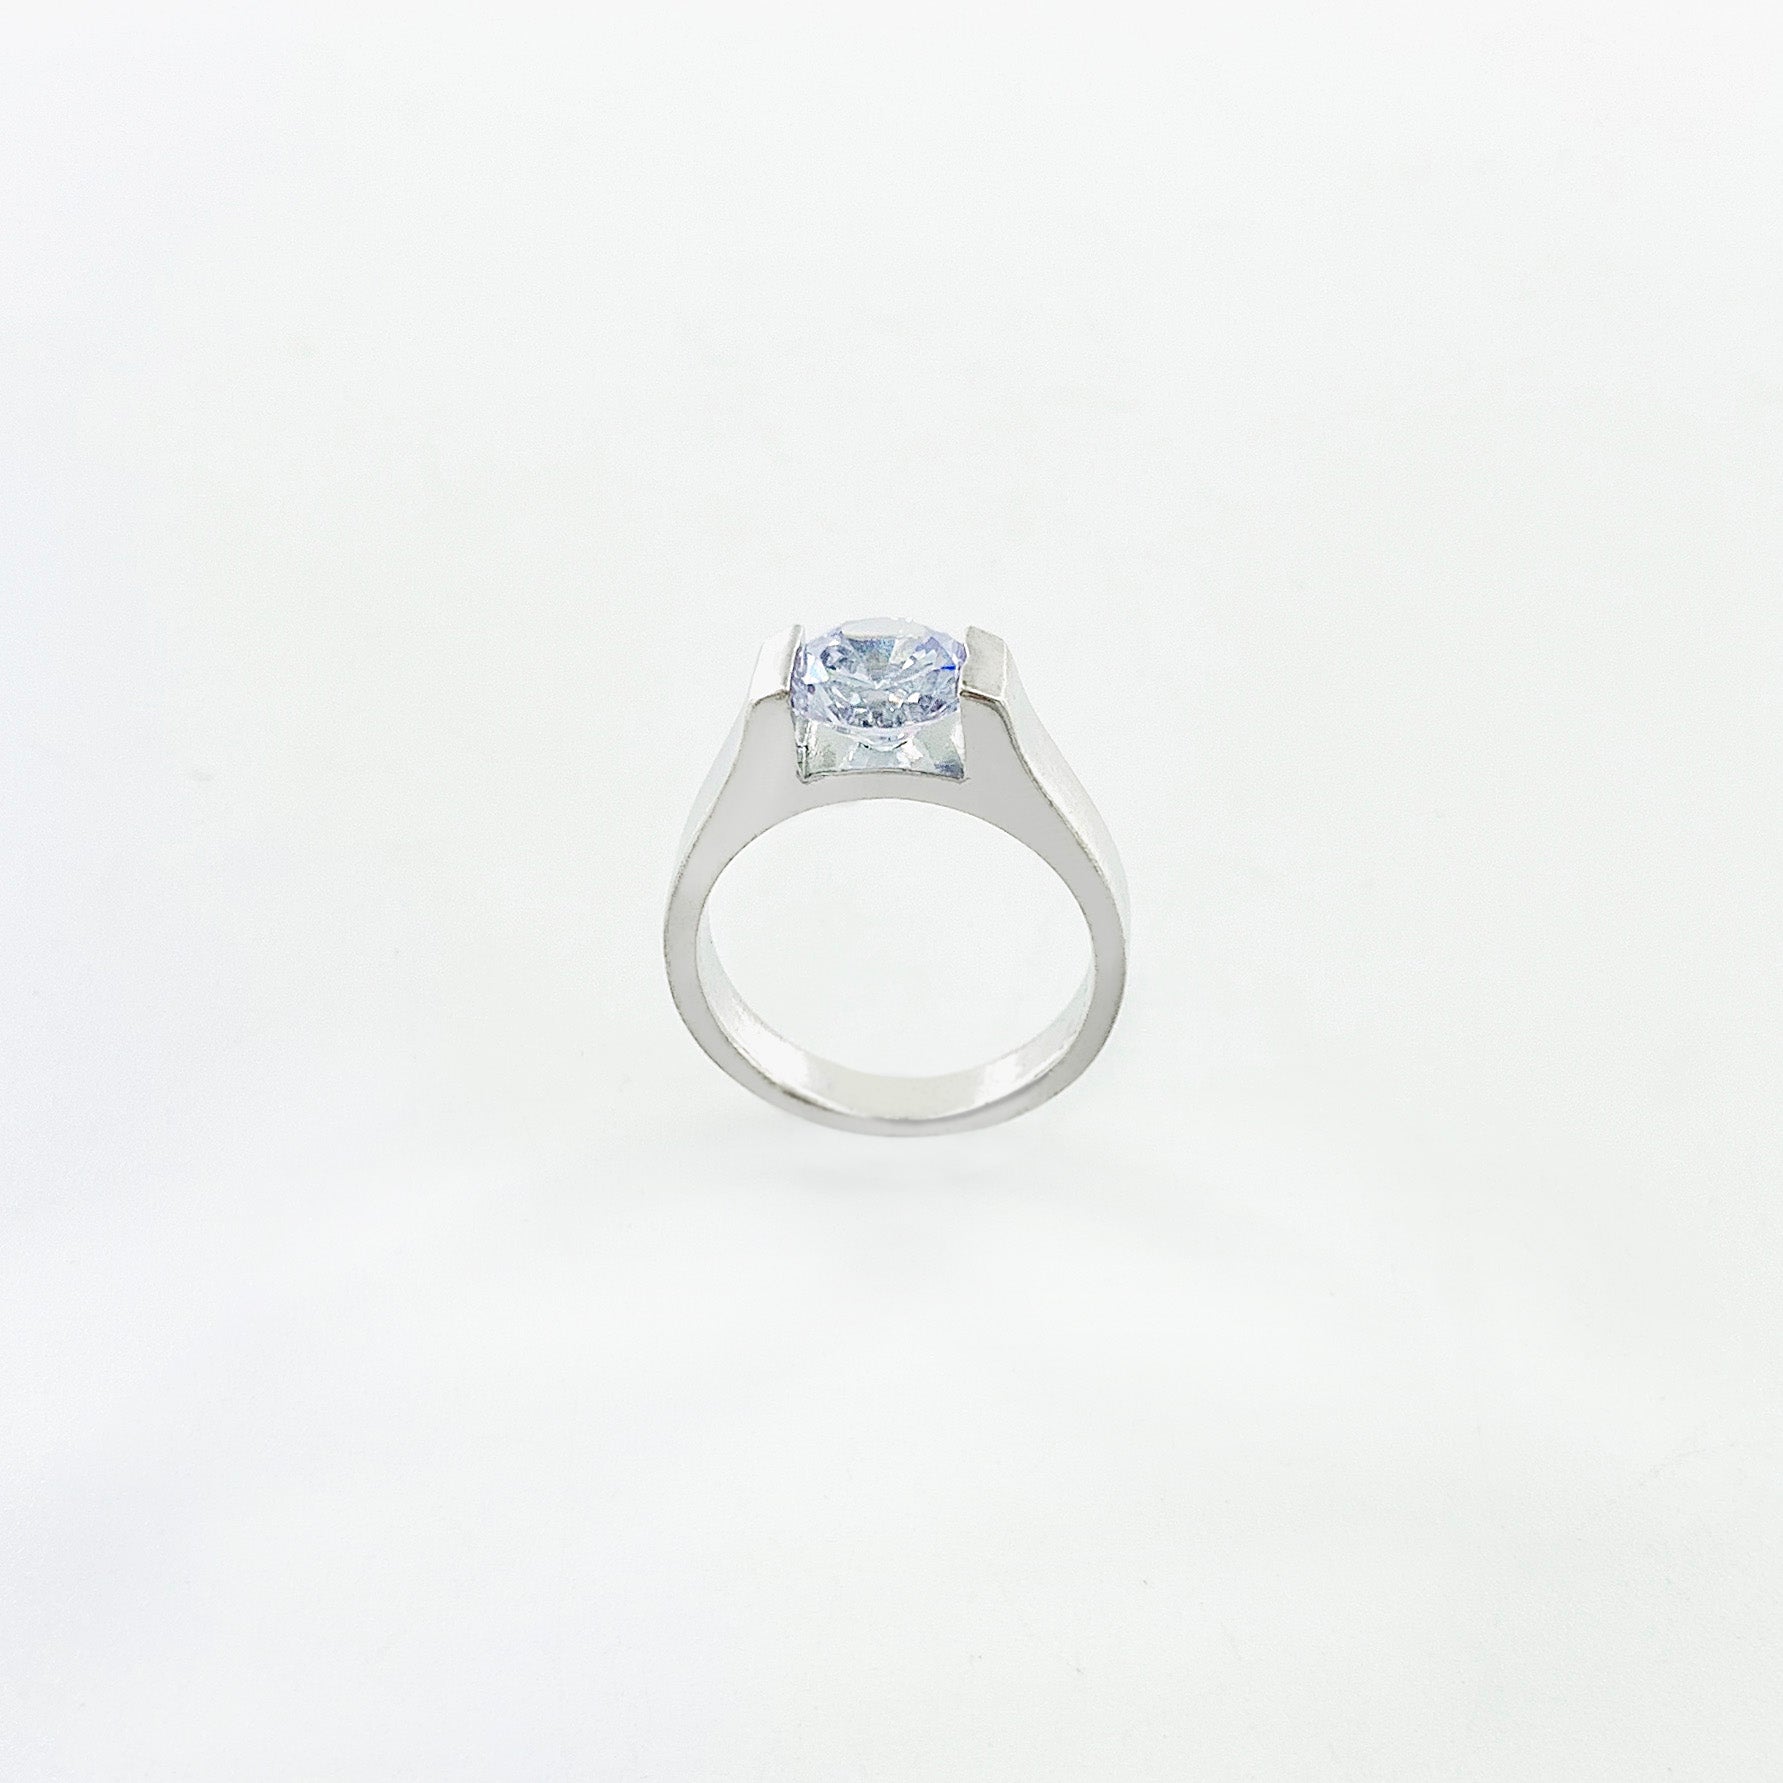 Silver ring with blue-tinged crystal stone